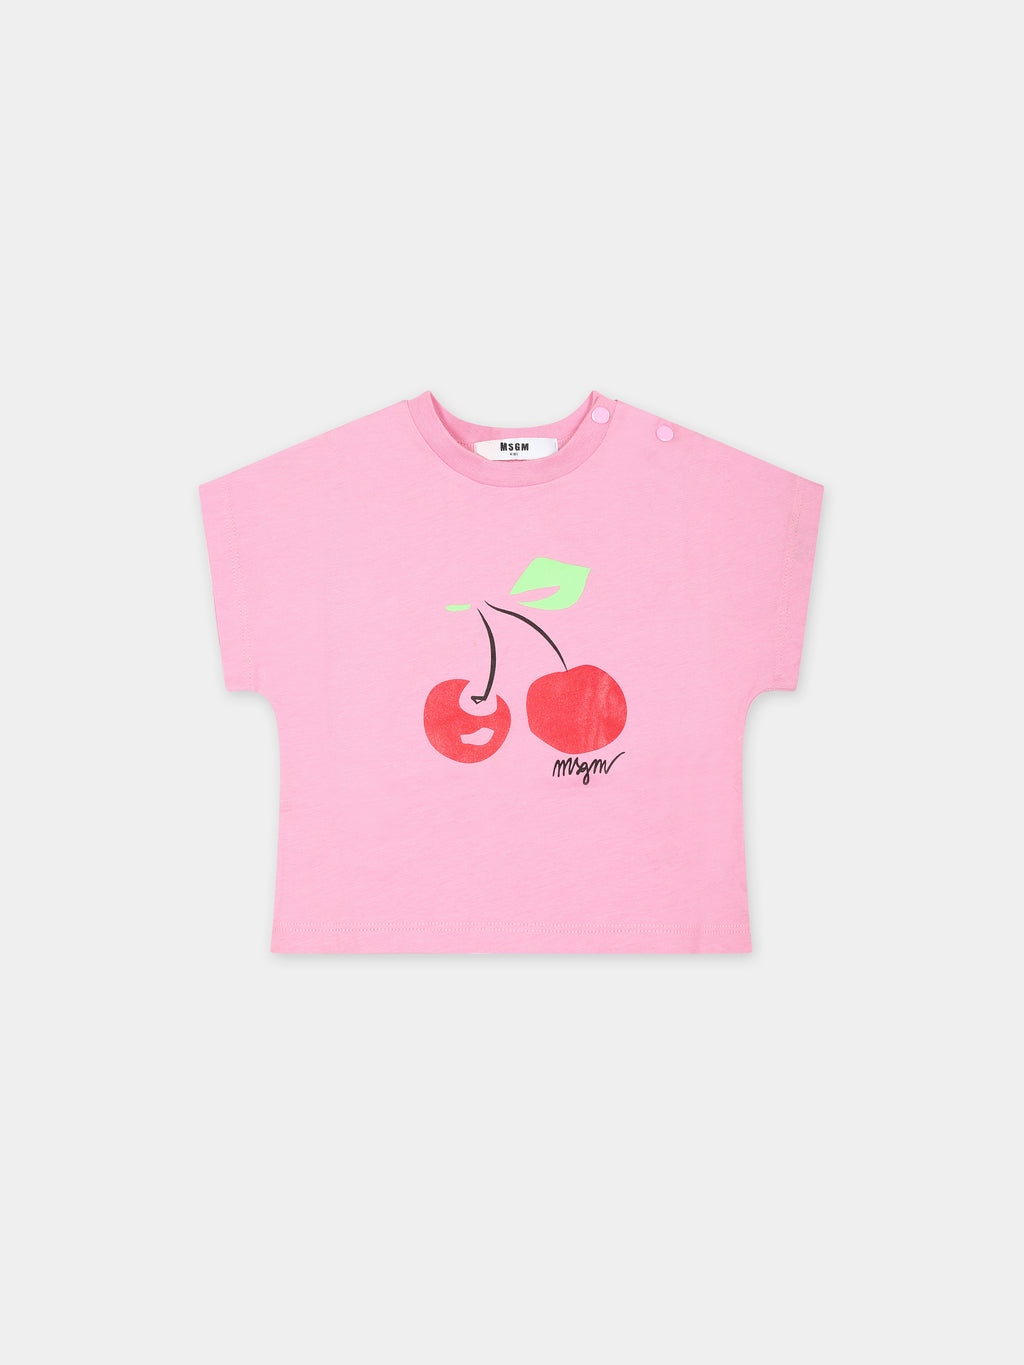 Pink t-shirt for baby girl with cherry print